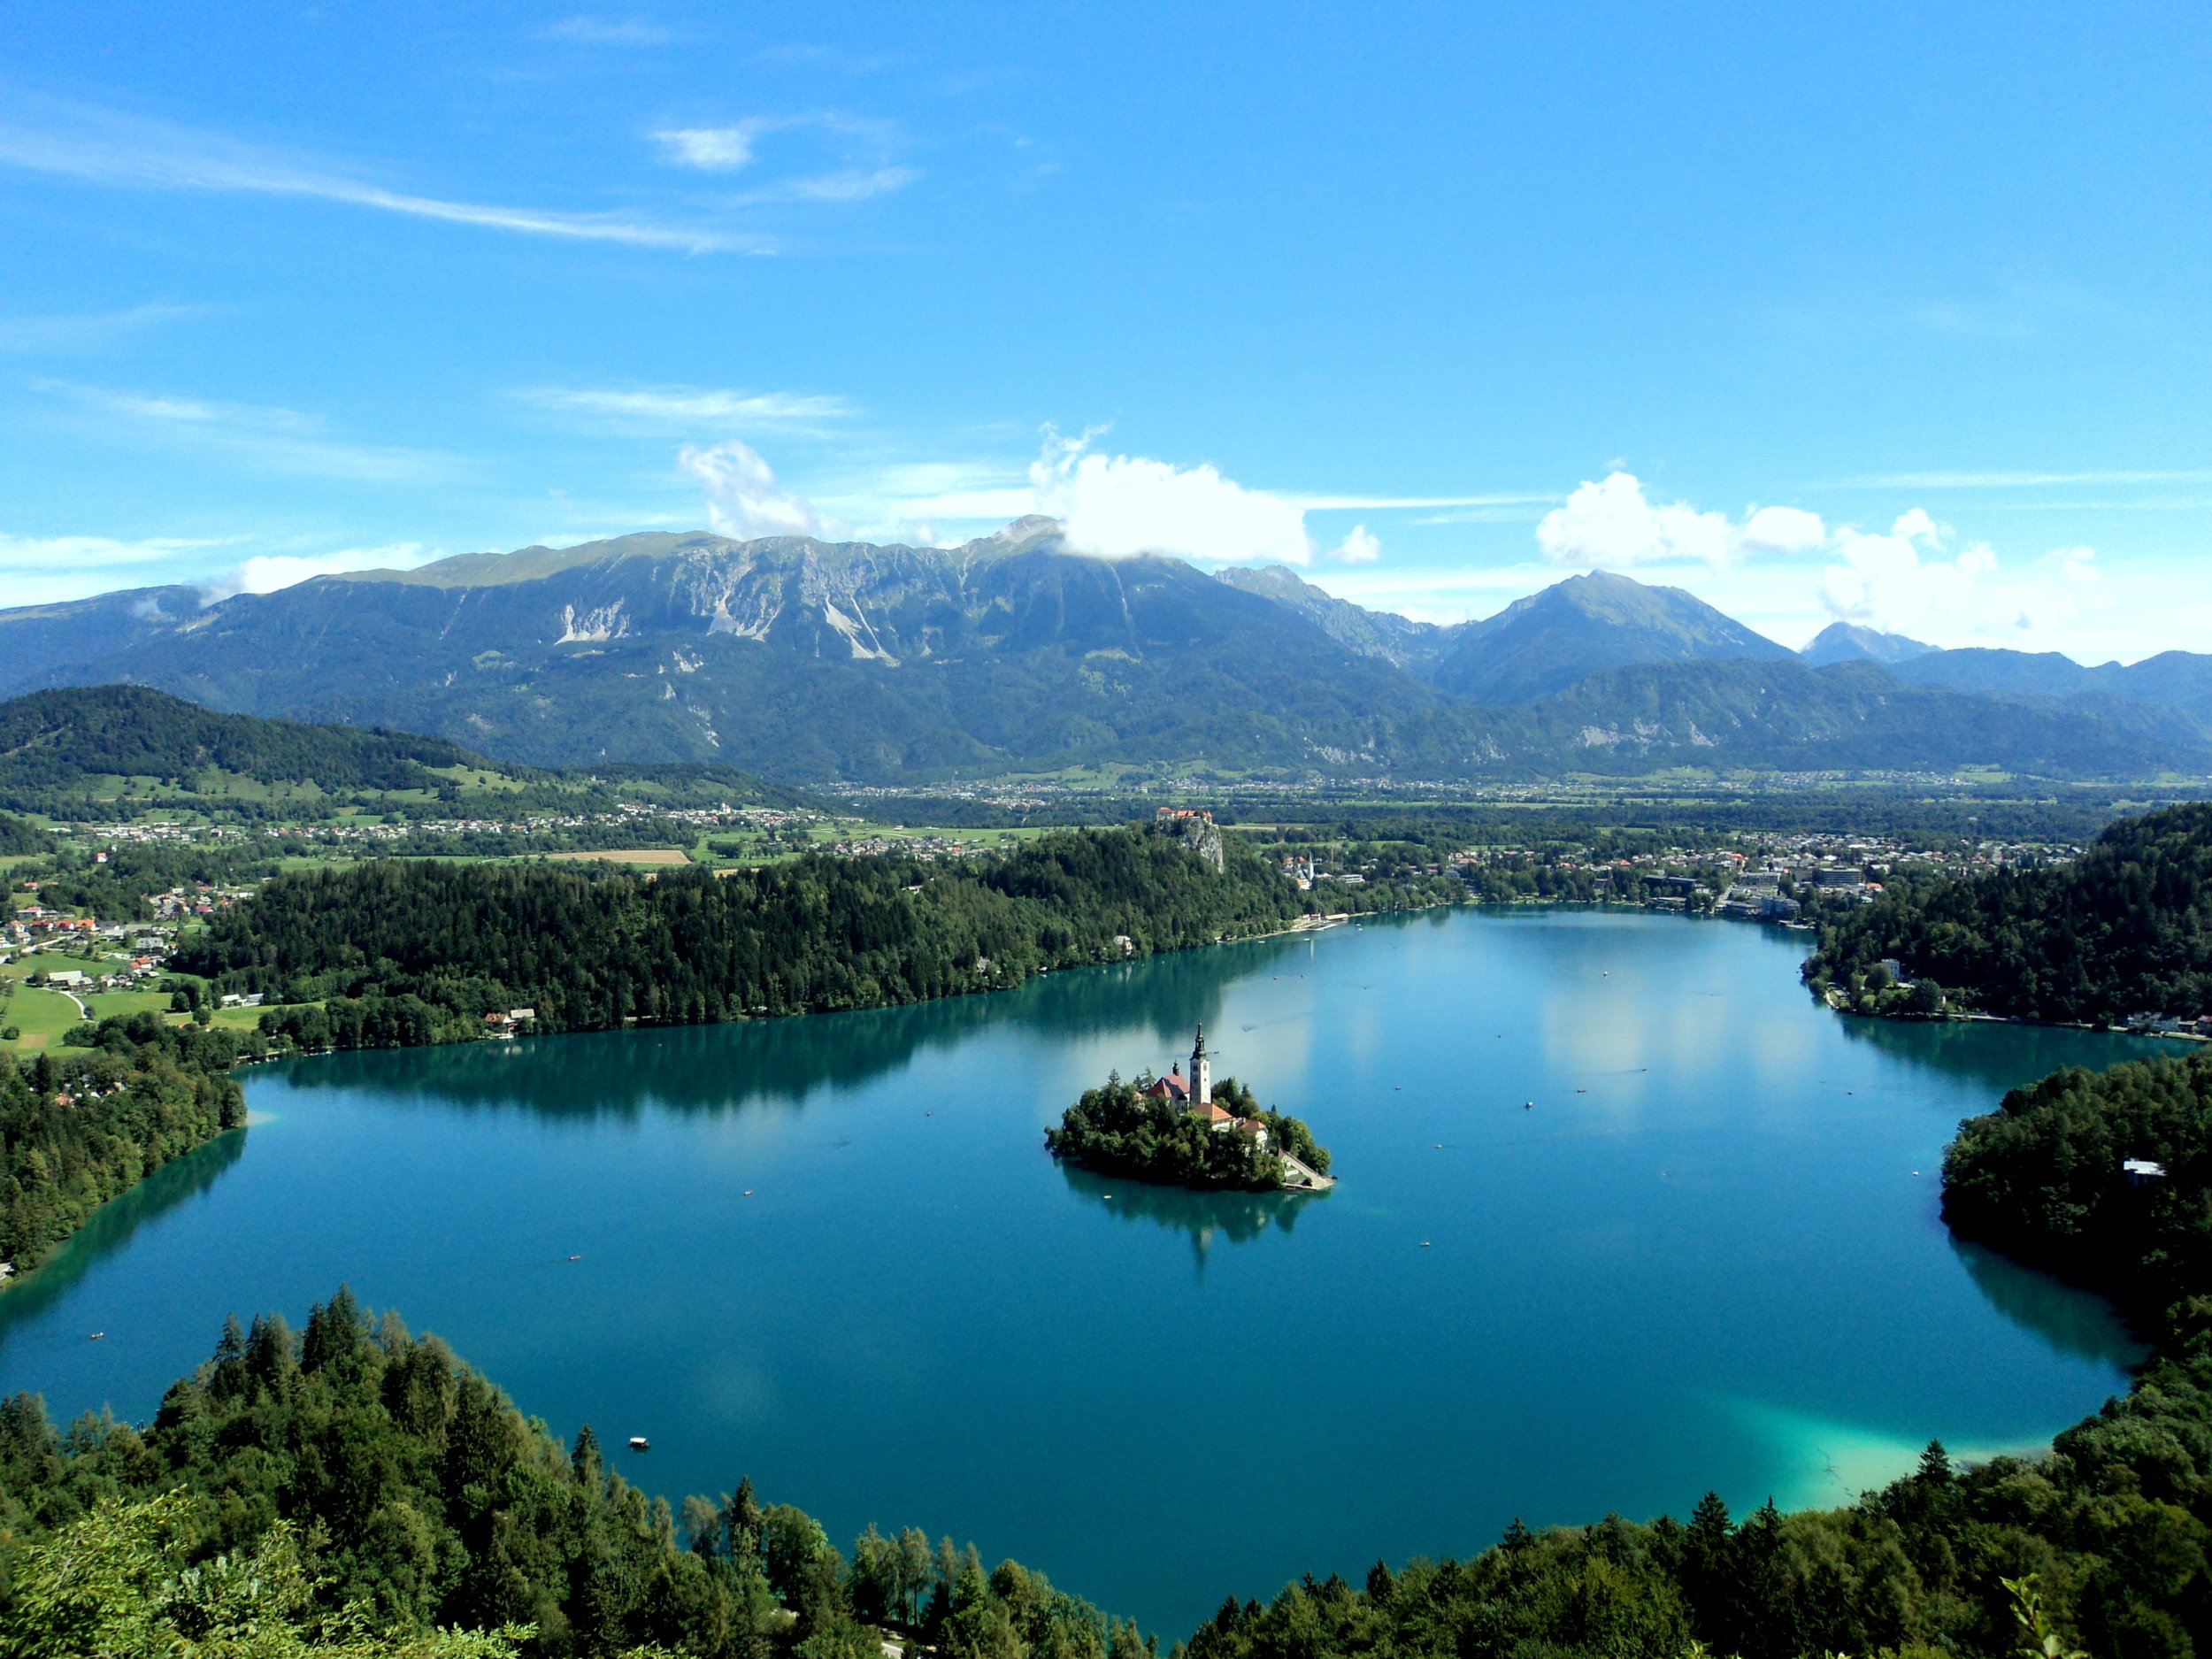 Lake_Bled_from_the_Mountain.jpg